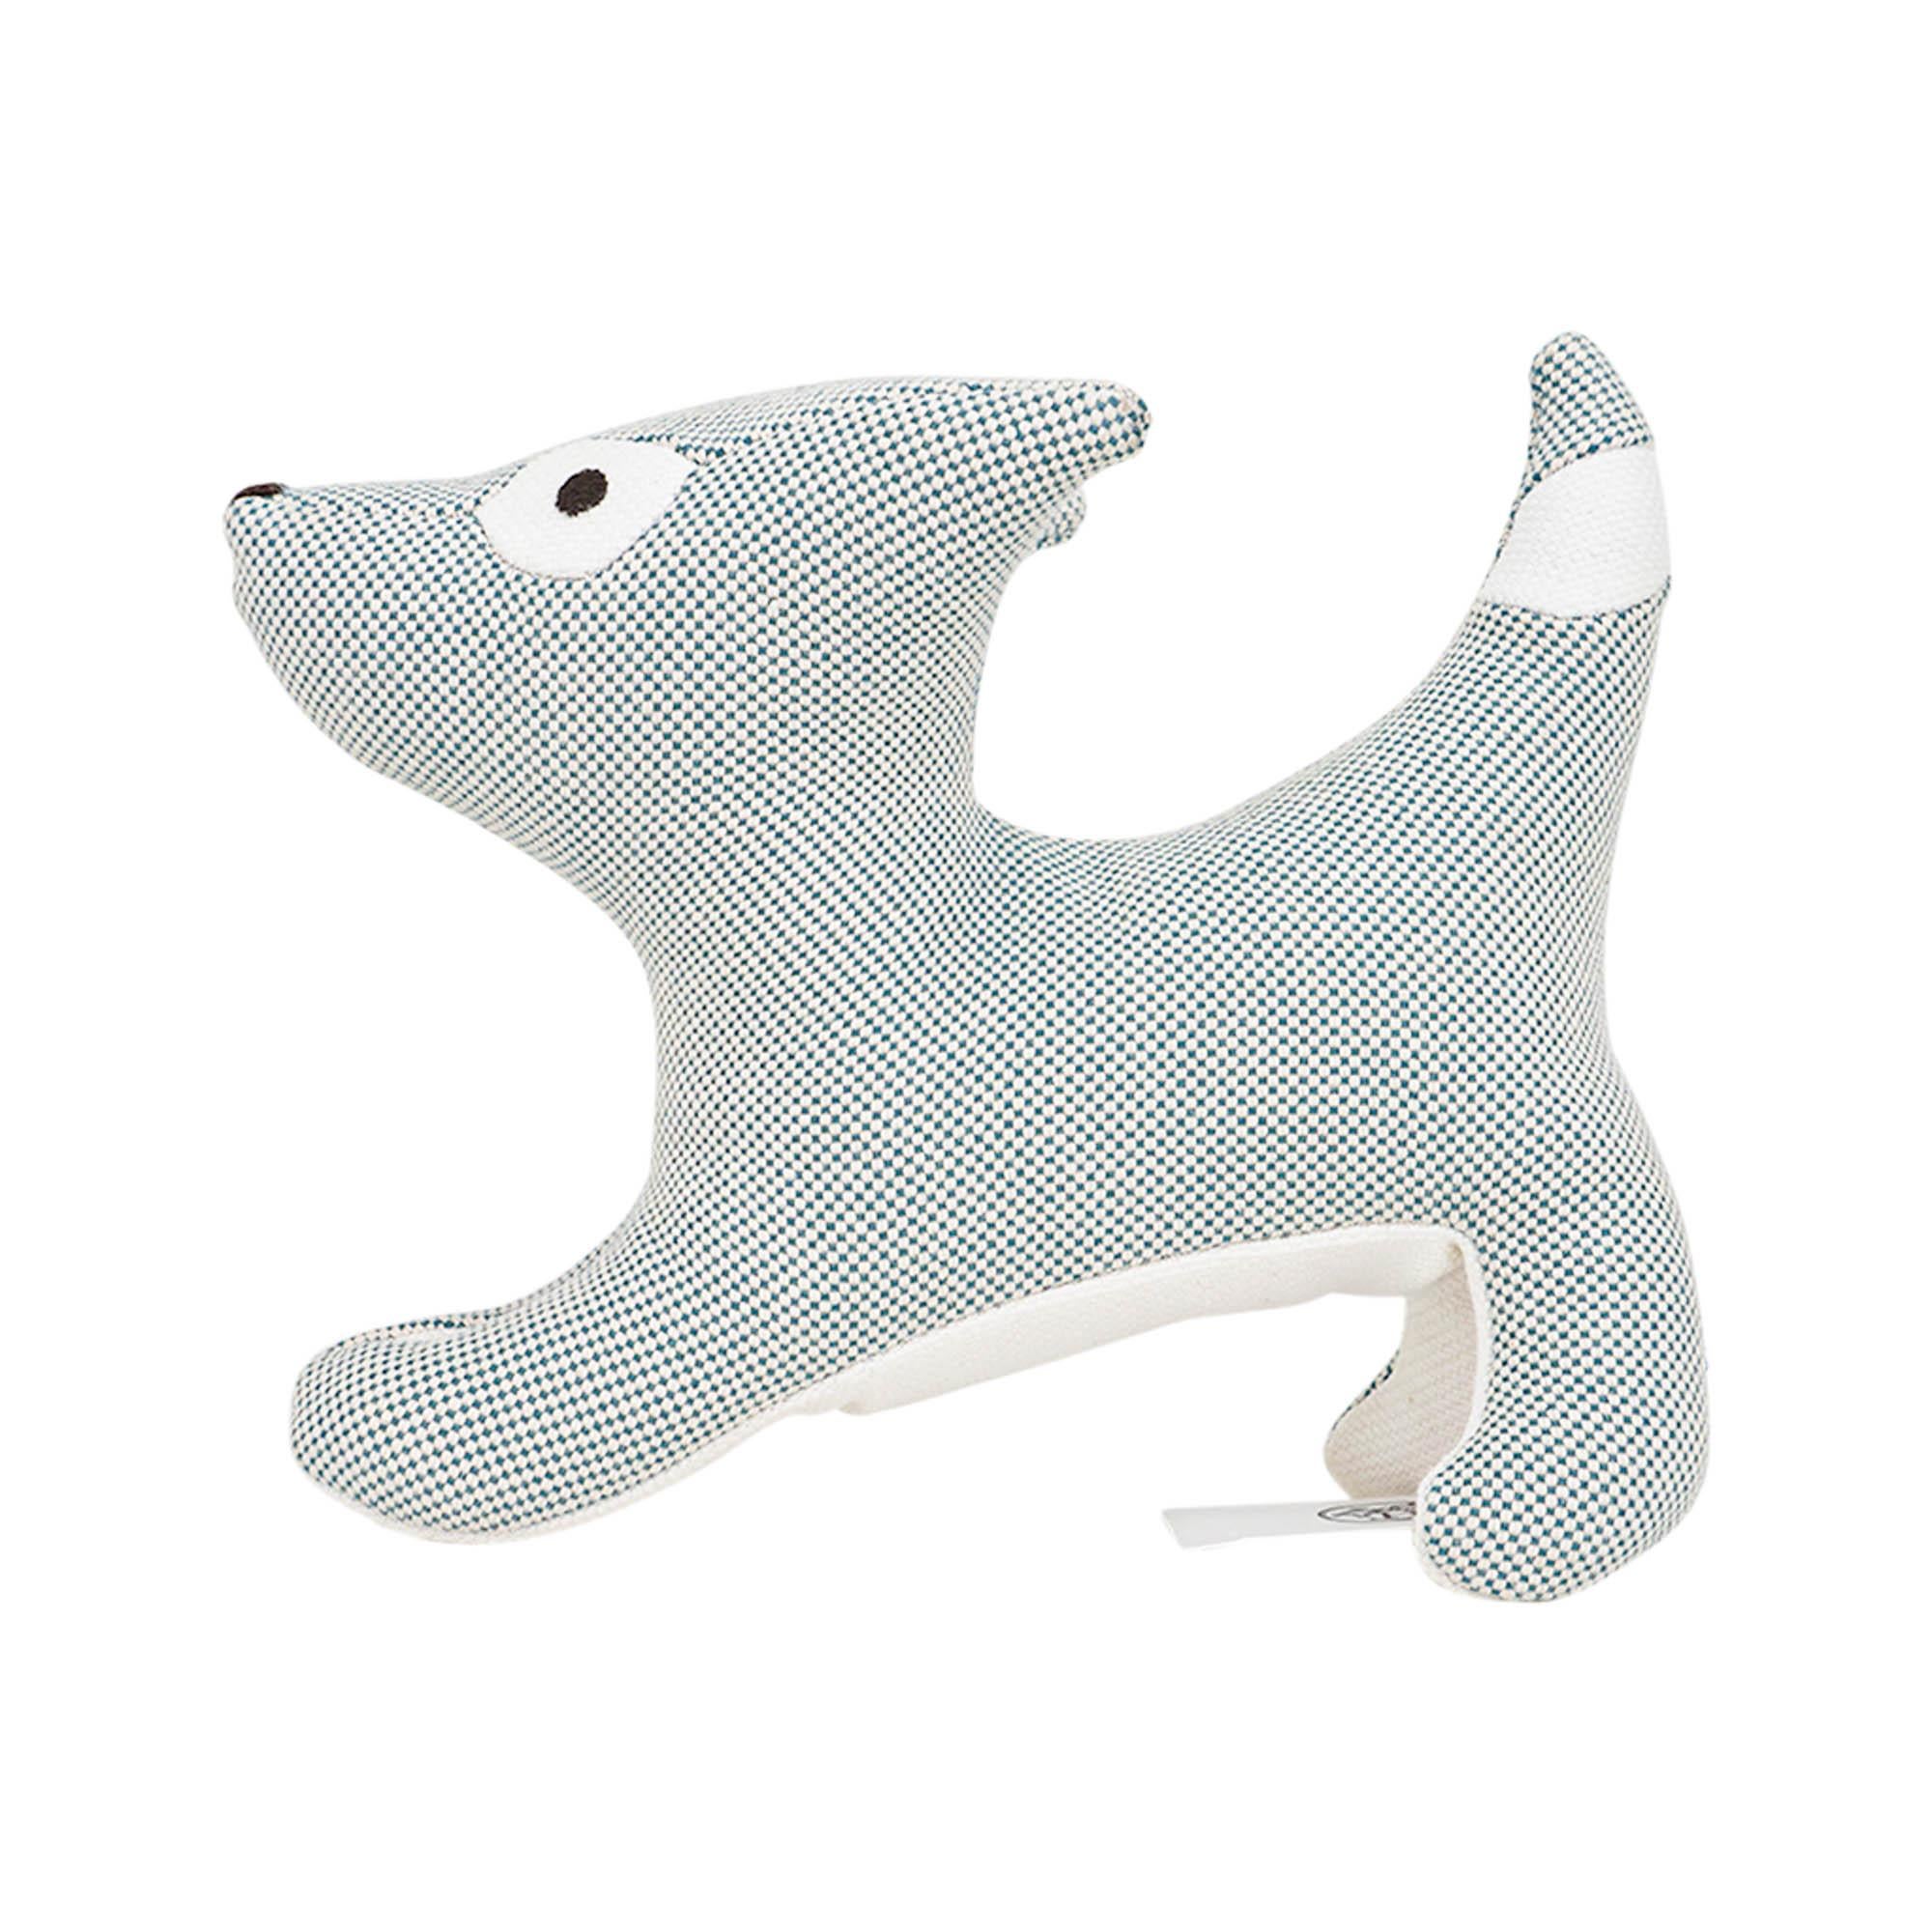 Mightychic offers an Hermes Nestor Epopee Dog Plush Toy featured in Blue Nattier.
H canvas cotton.
Delightful!
Designed by Jan Bajtlik.
A charming gift idea.
Fabric is 100% cotton with polyester filling.
New or Store Fresh Condition.
final sale

DOG